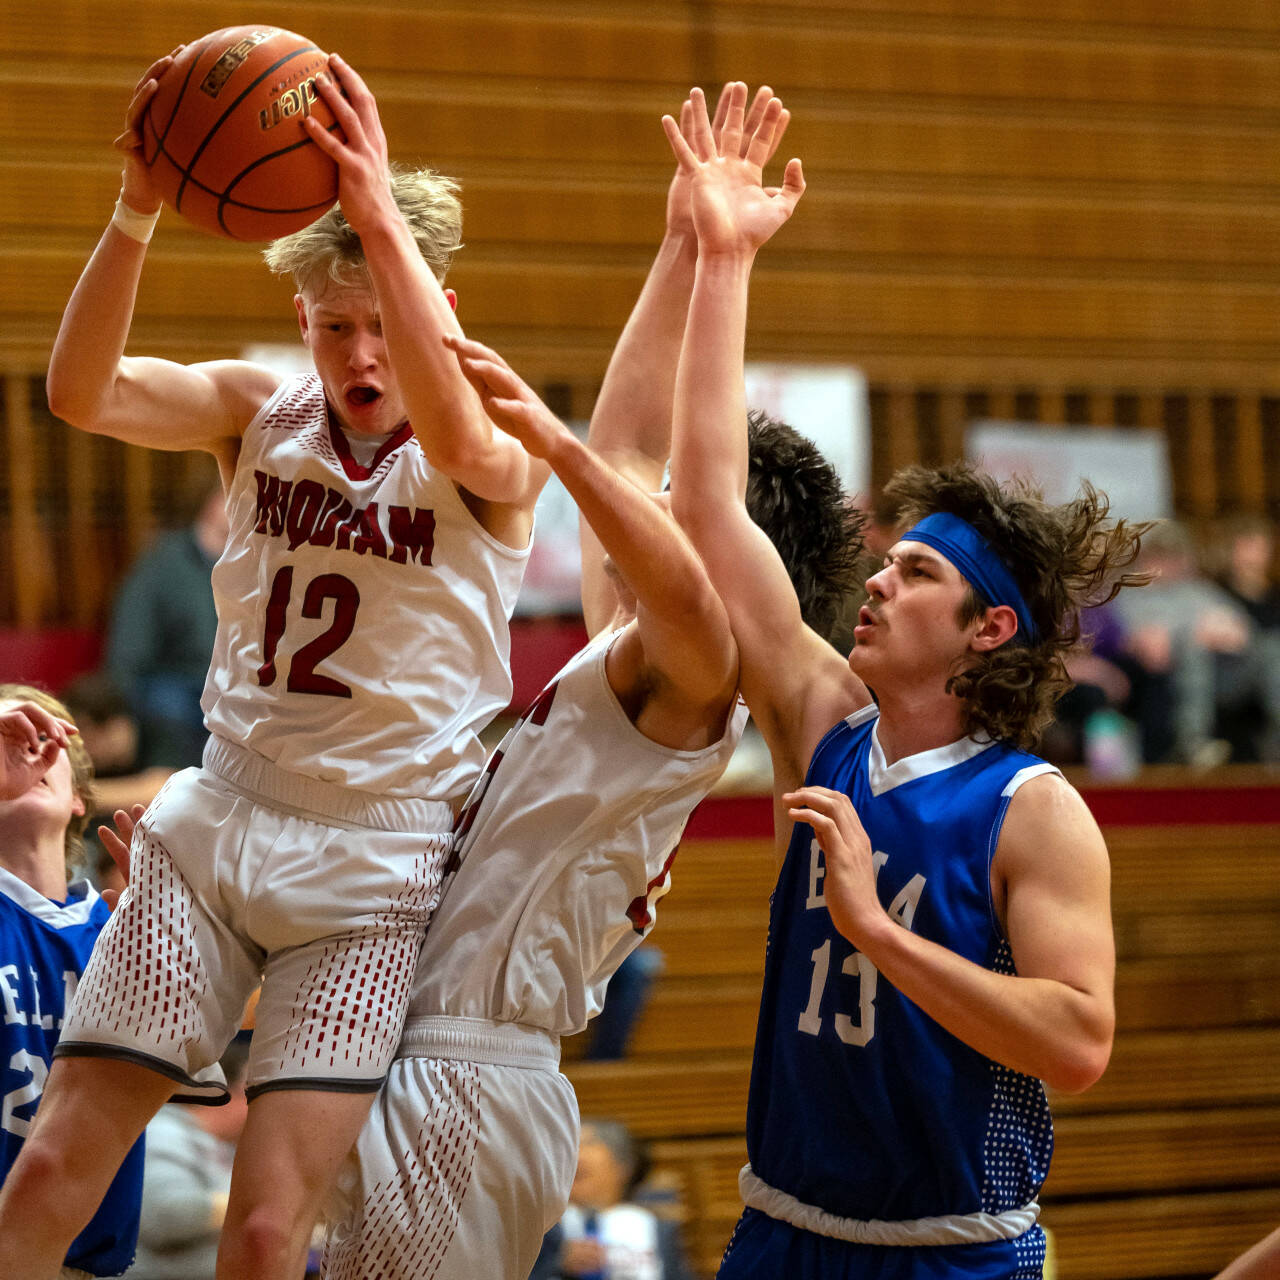 PHOTO BY FOREST WORGUM Hoquiam’s Michael Lorton Watkins (12) grabs a rebound against Elma’s Gibson Cain during the Grizzlies’ 60-51 win on Friday at Hoquiam Square Garden.